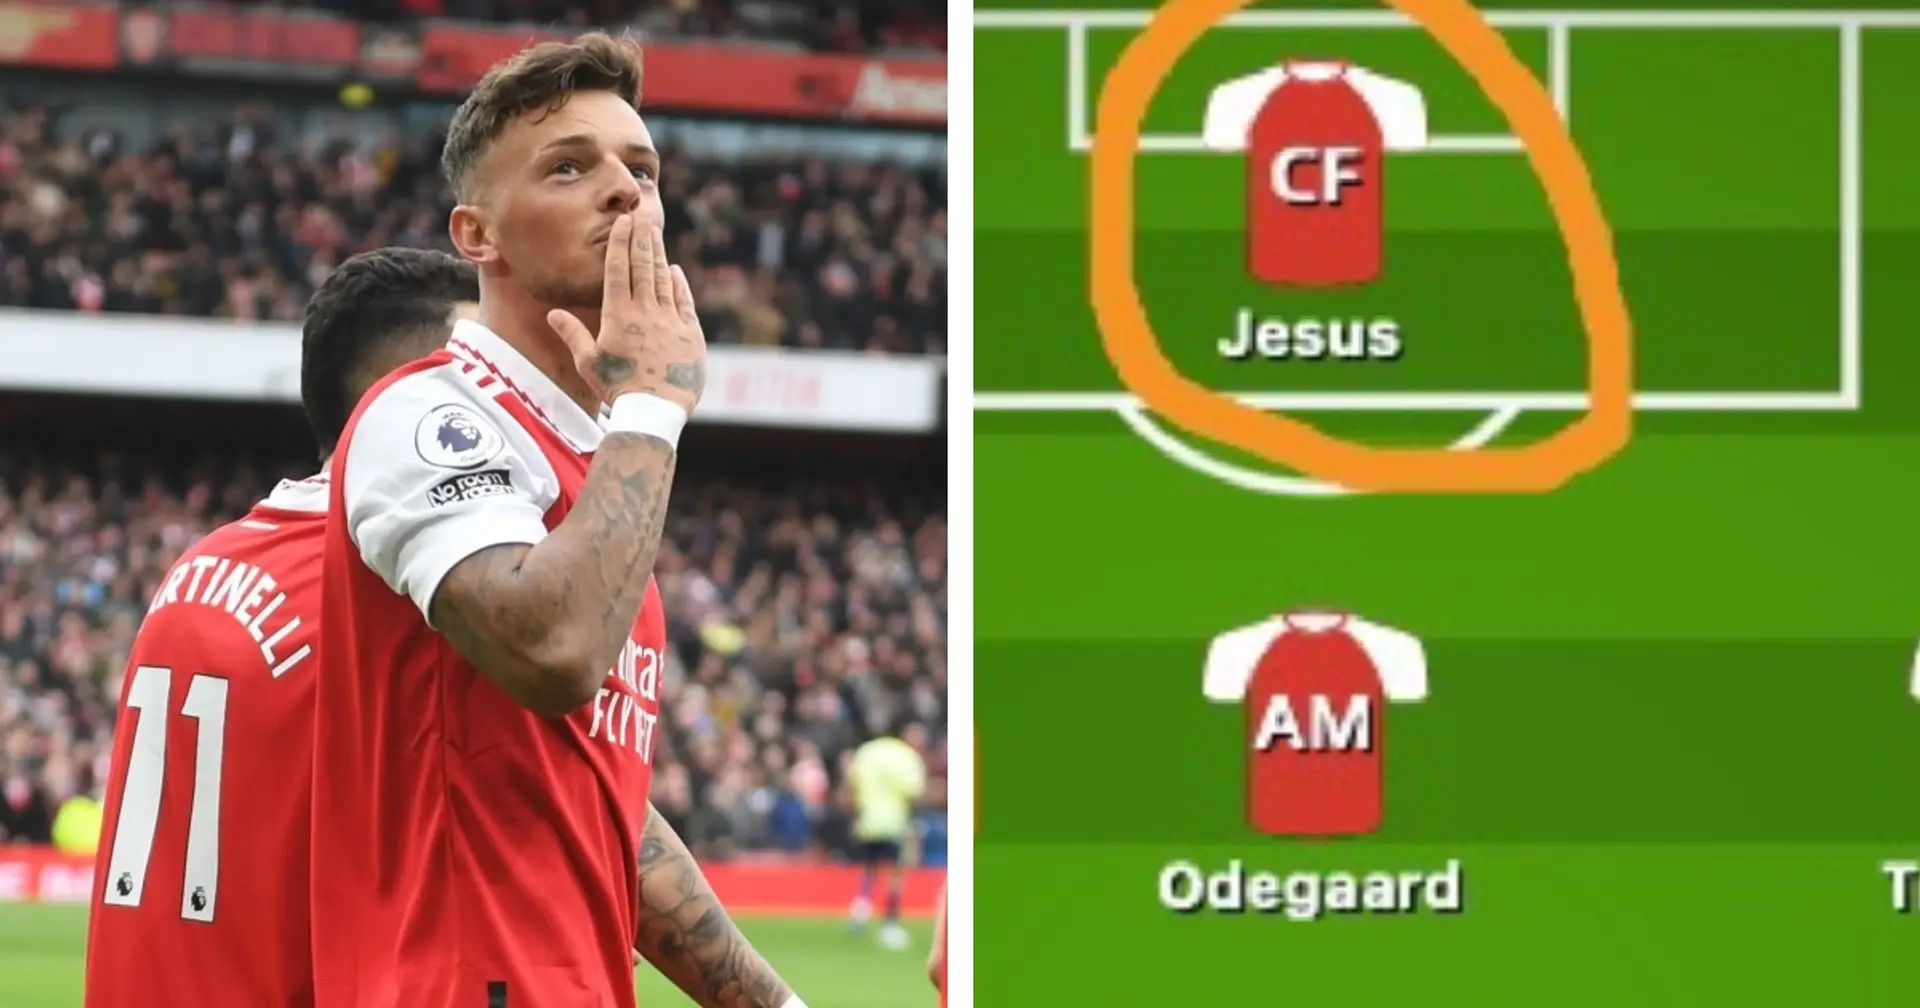 Arsenal's biggest strengths in Leeds win shown in lineup - two players feature